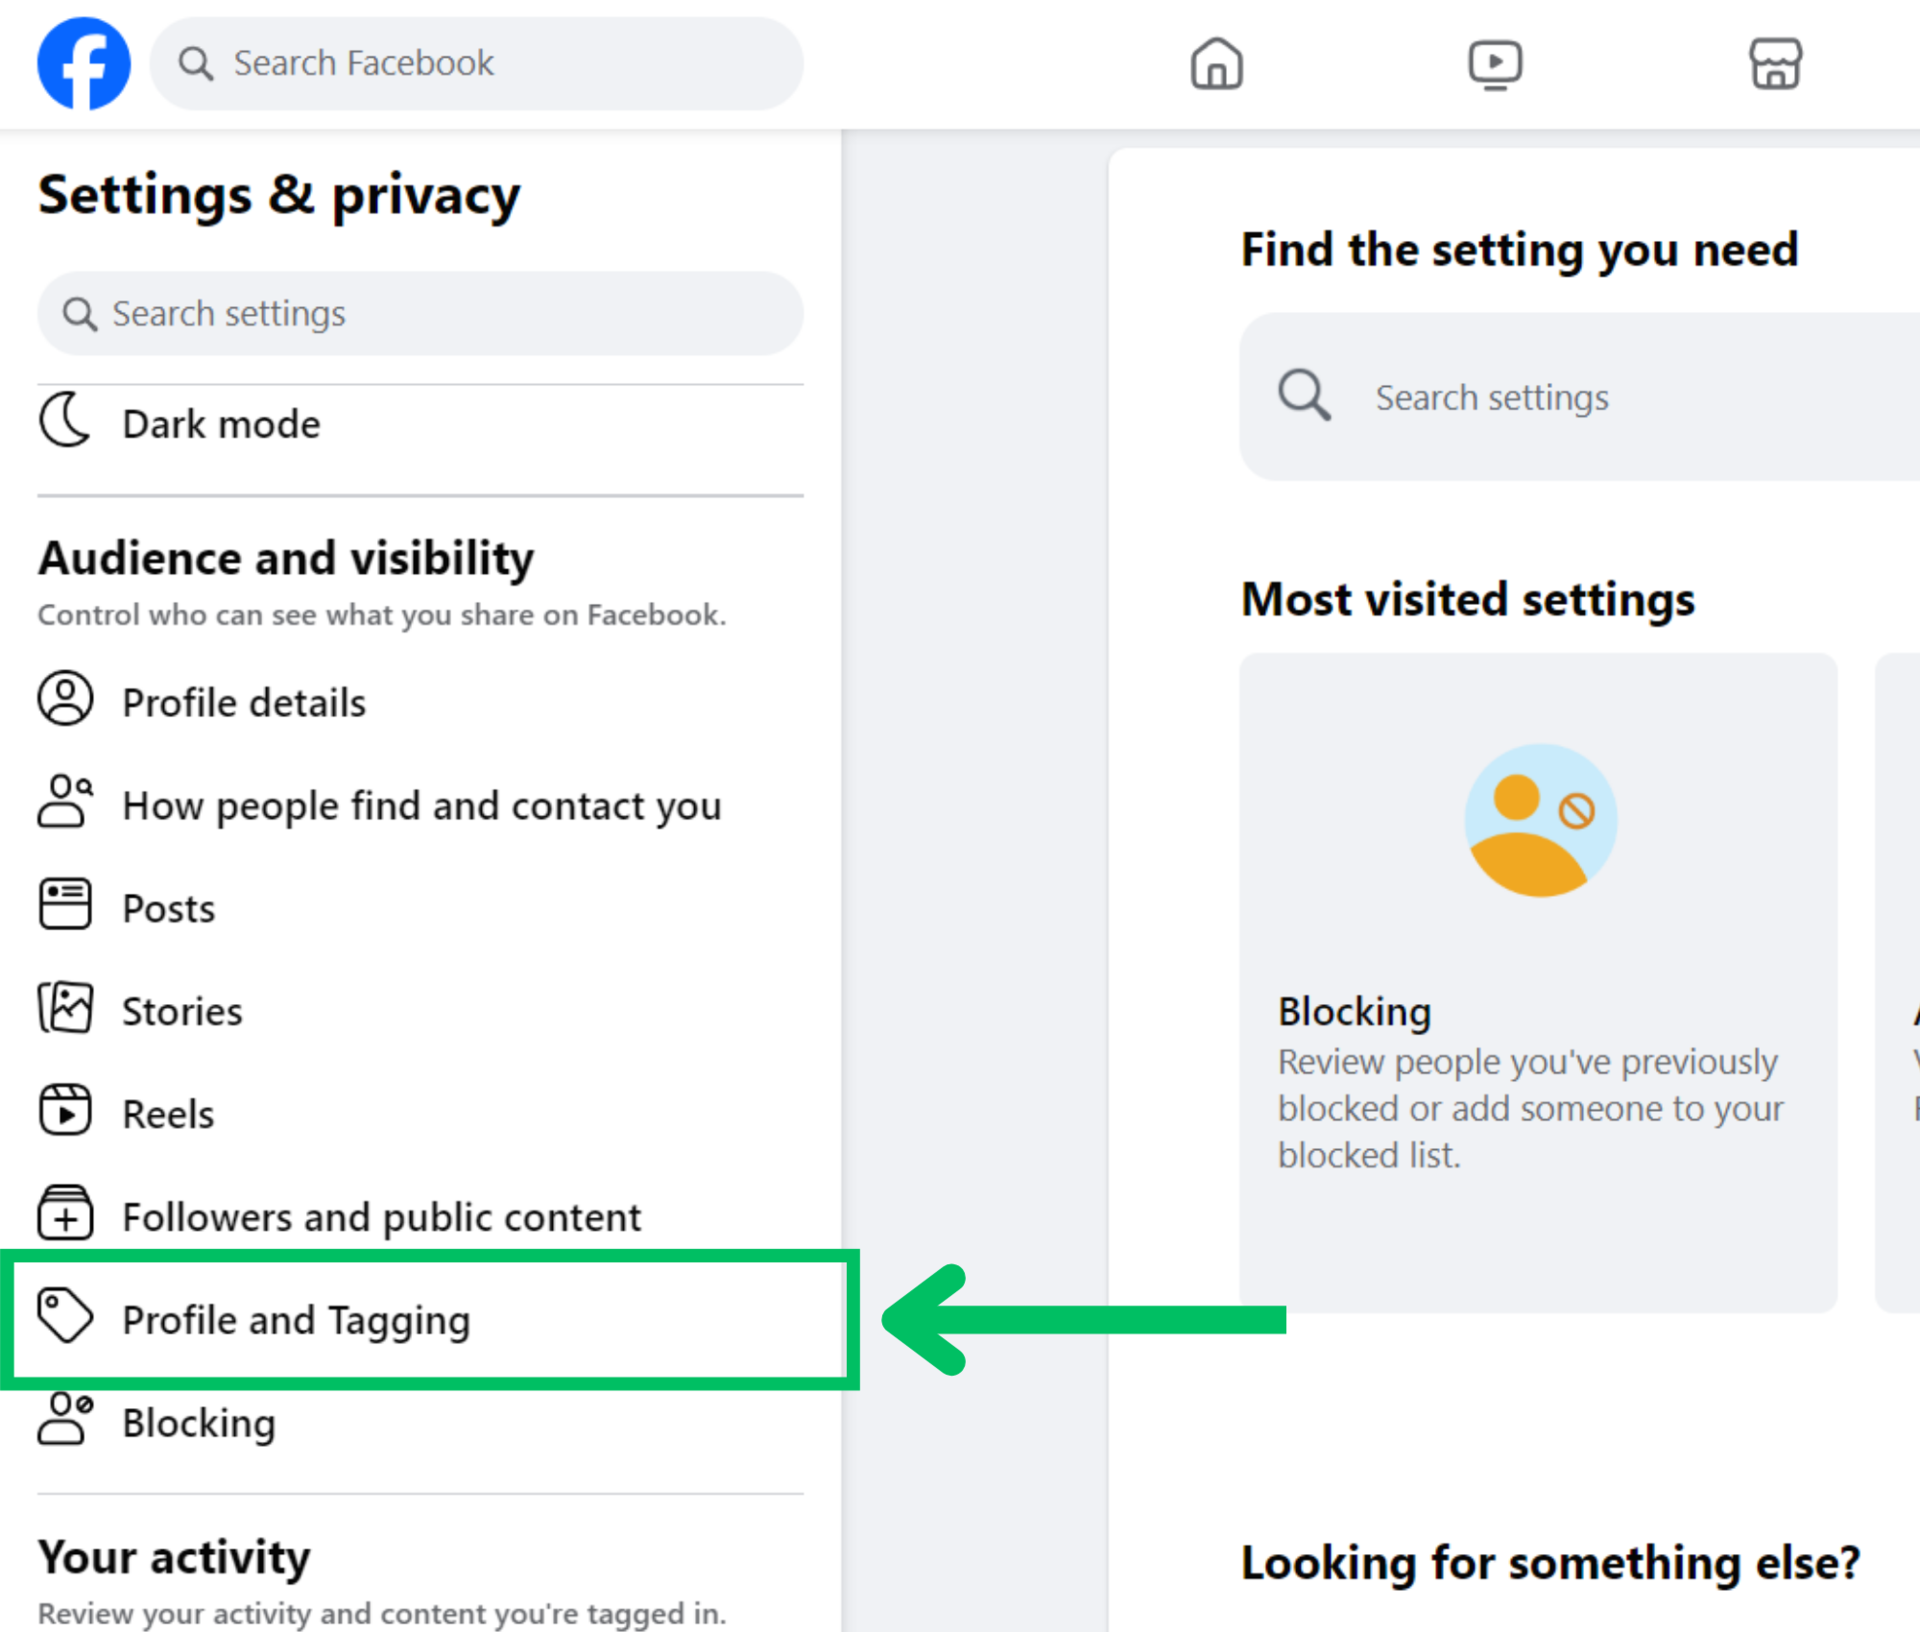 Facebook desktop settings & privacy profile and tagging